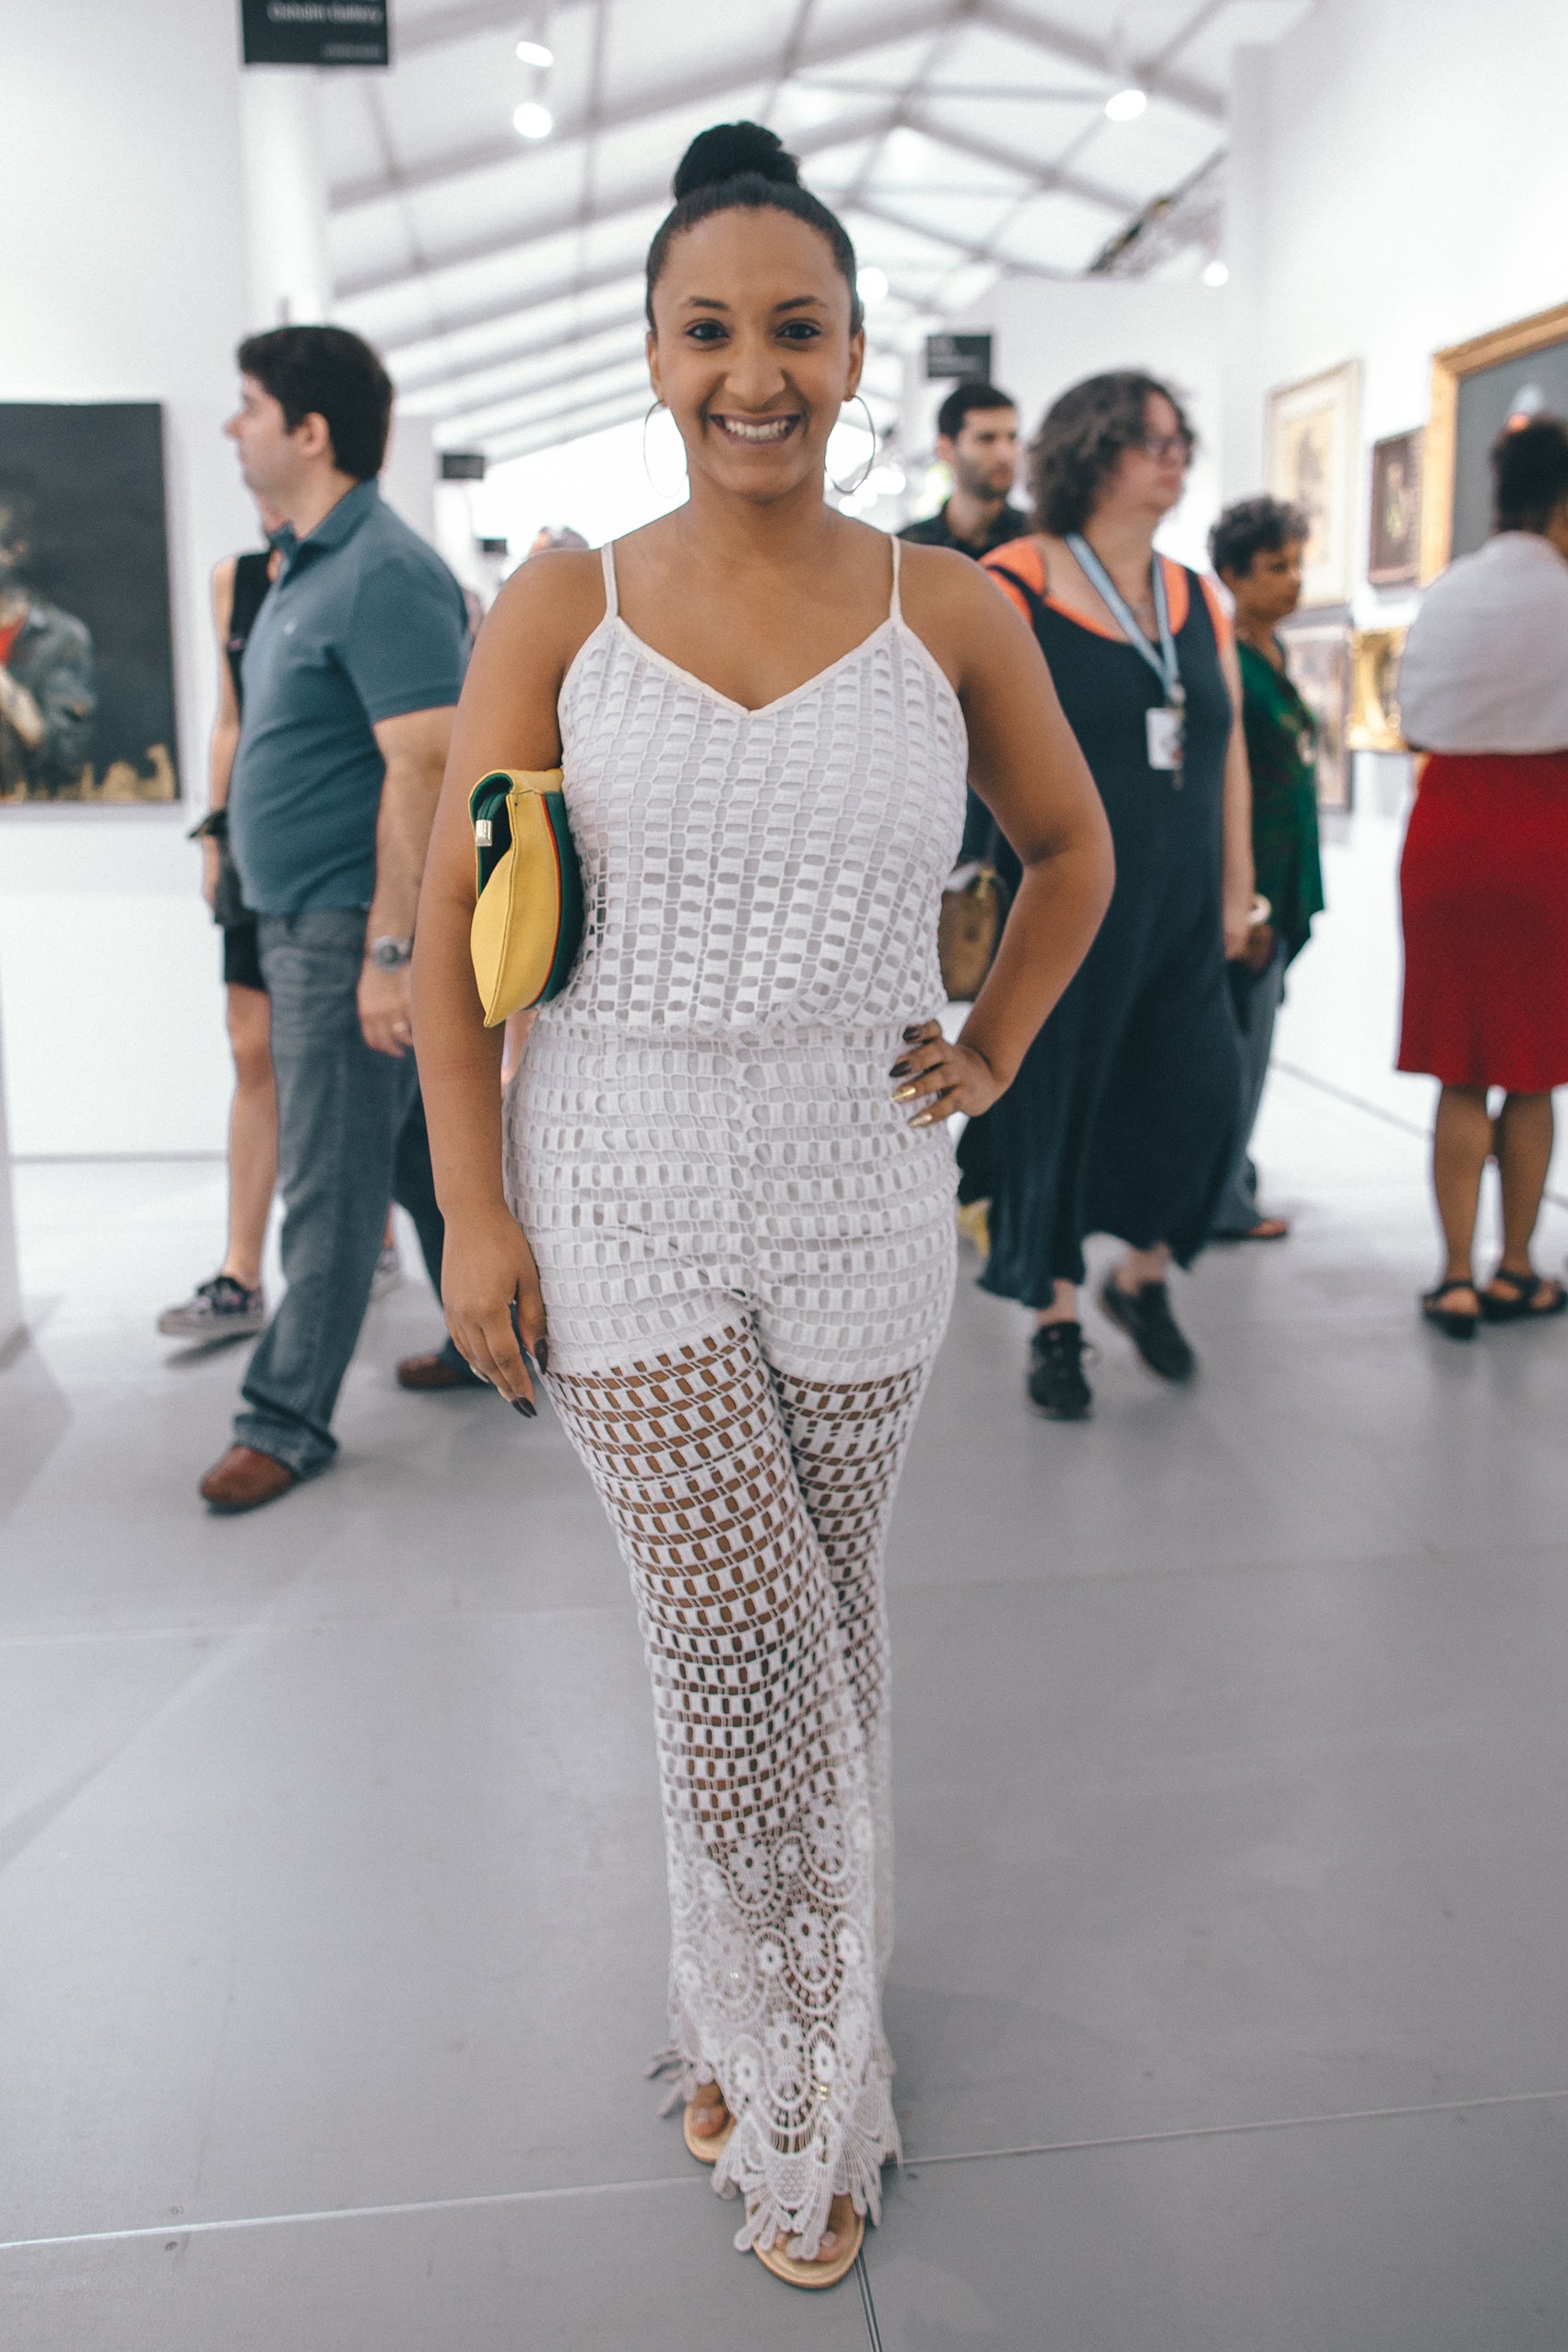 Welcome To Miami: The Best Looks Spotted At Art Basel
